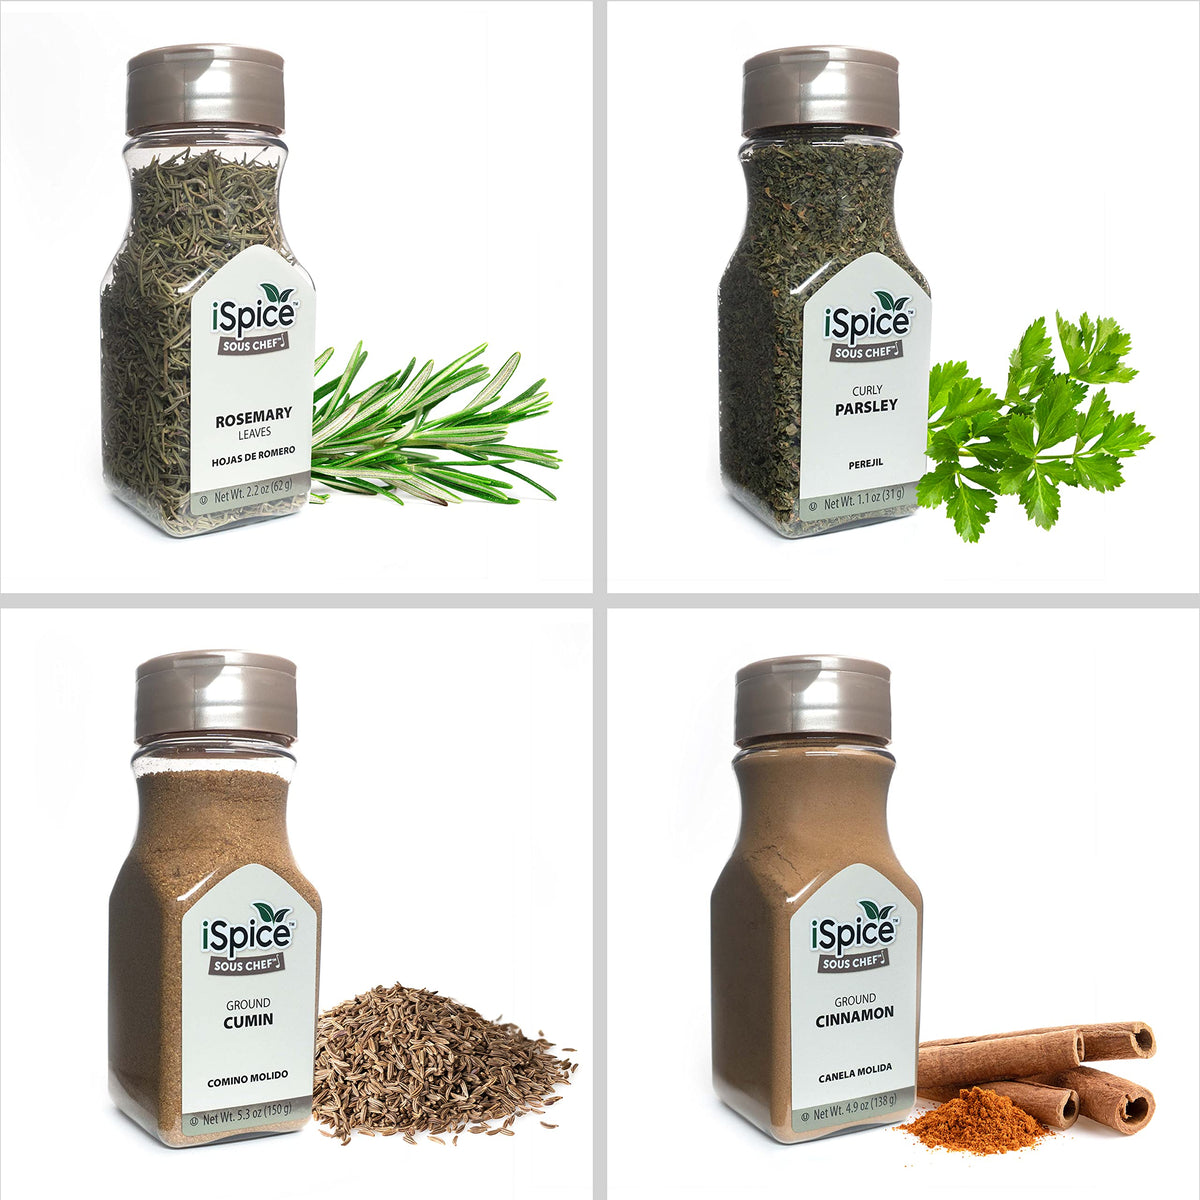 Must-Have Spices and Herbs for New Cooks Creating a Basic Spice and Herb Kit Top 12 Spices and Herbs for Novice Cooks